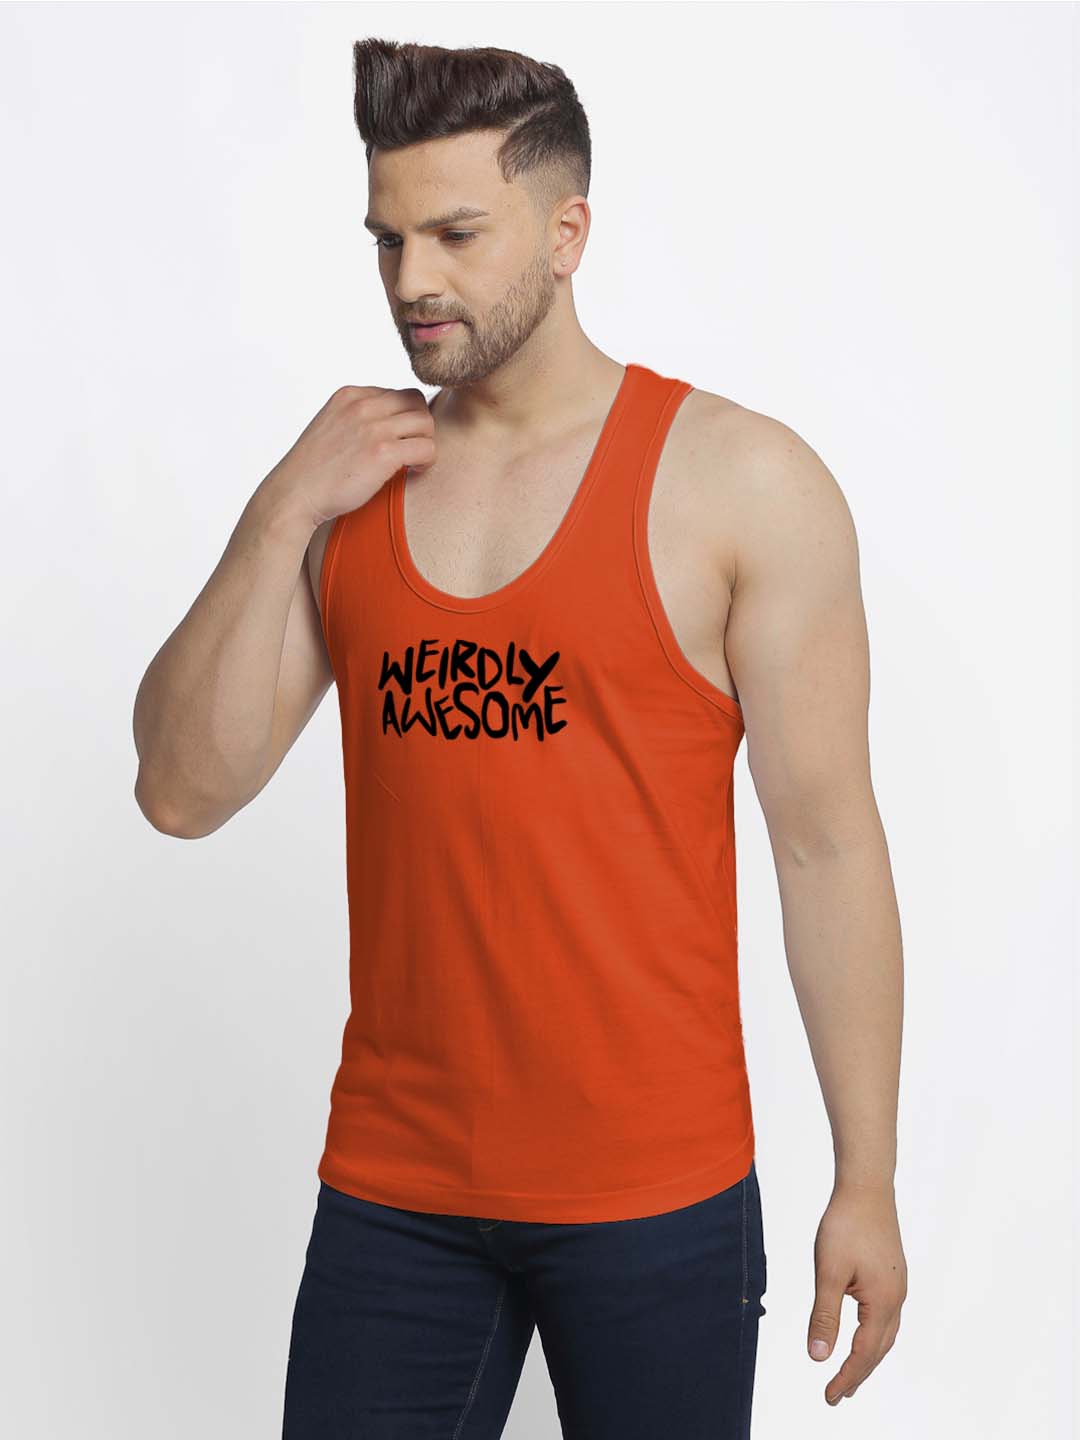 Mens's Weirdly Awesome Printed Innerwear Gym Vest - Friskers